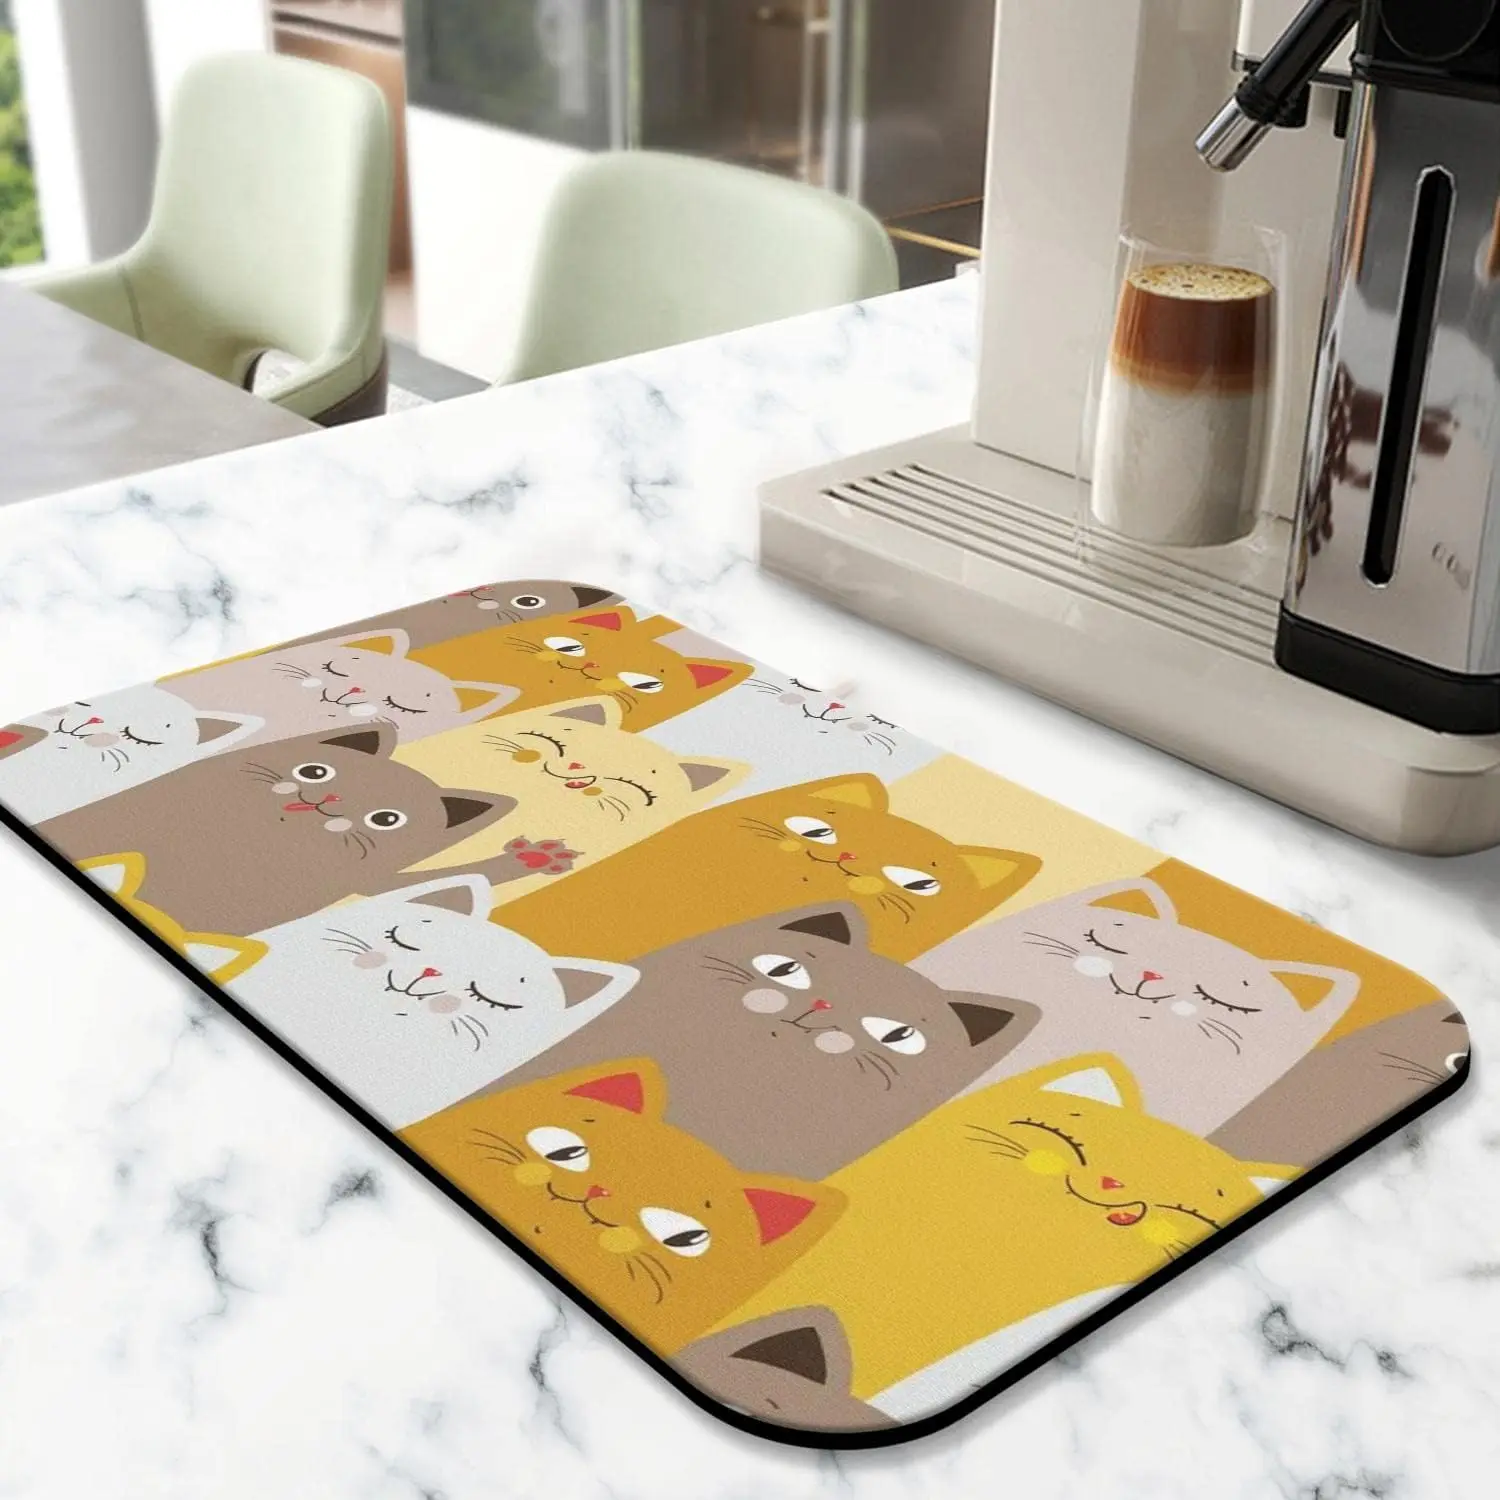 https://ae01.alicdn.com/kf/Saaa05ce898aa4141b341b39c1a6994b6g/Modern-Expandable-Dish-Drying-Mats-for-Kitchen-Counter-Lemon-Coffee-Corner-Decoration-and-Table-mat-Art.jpg